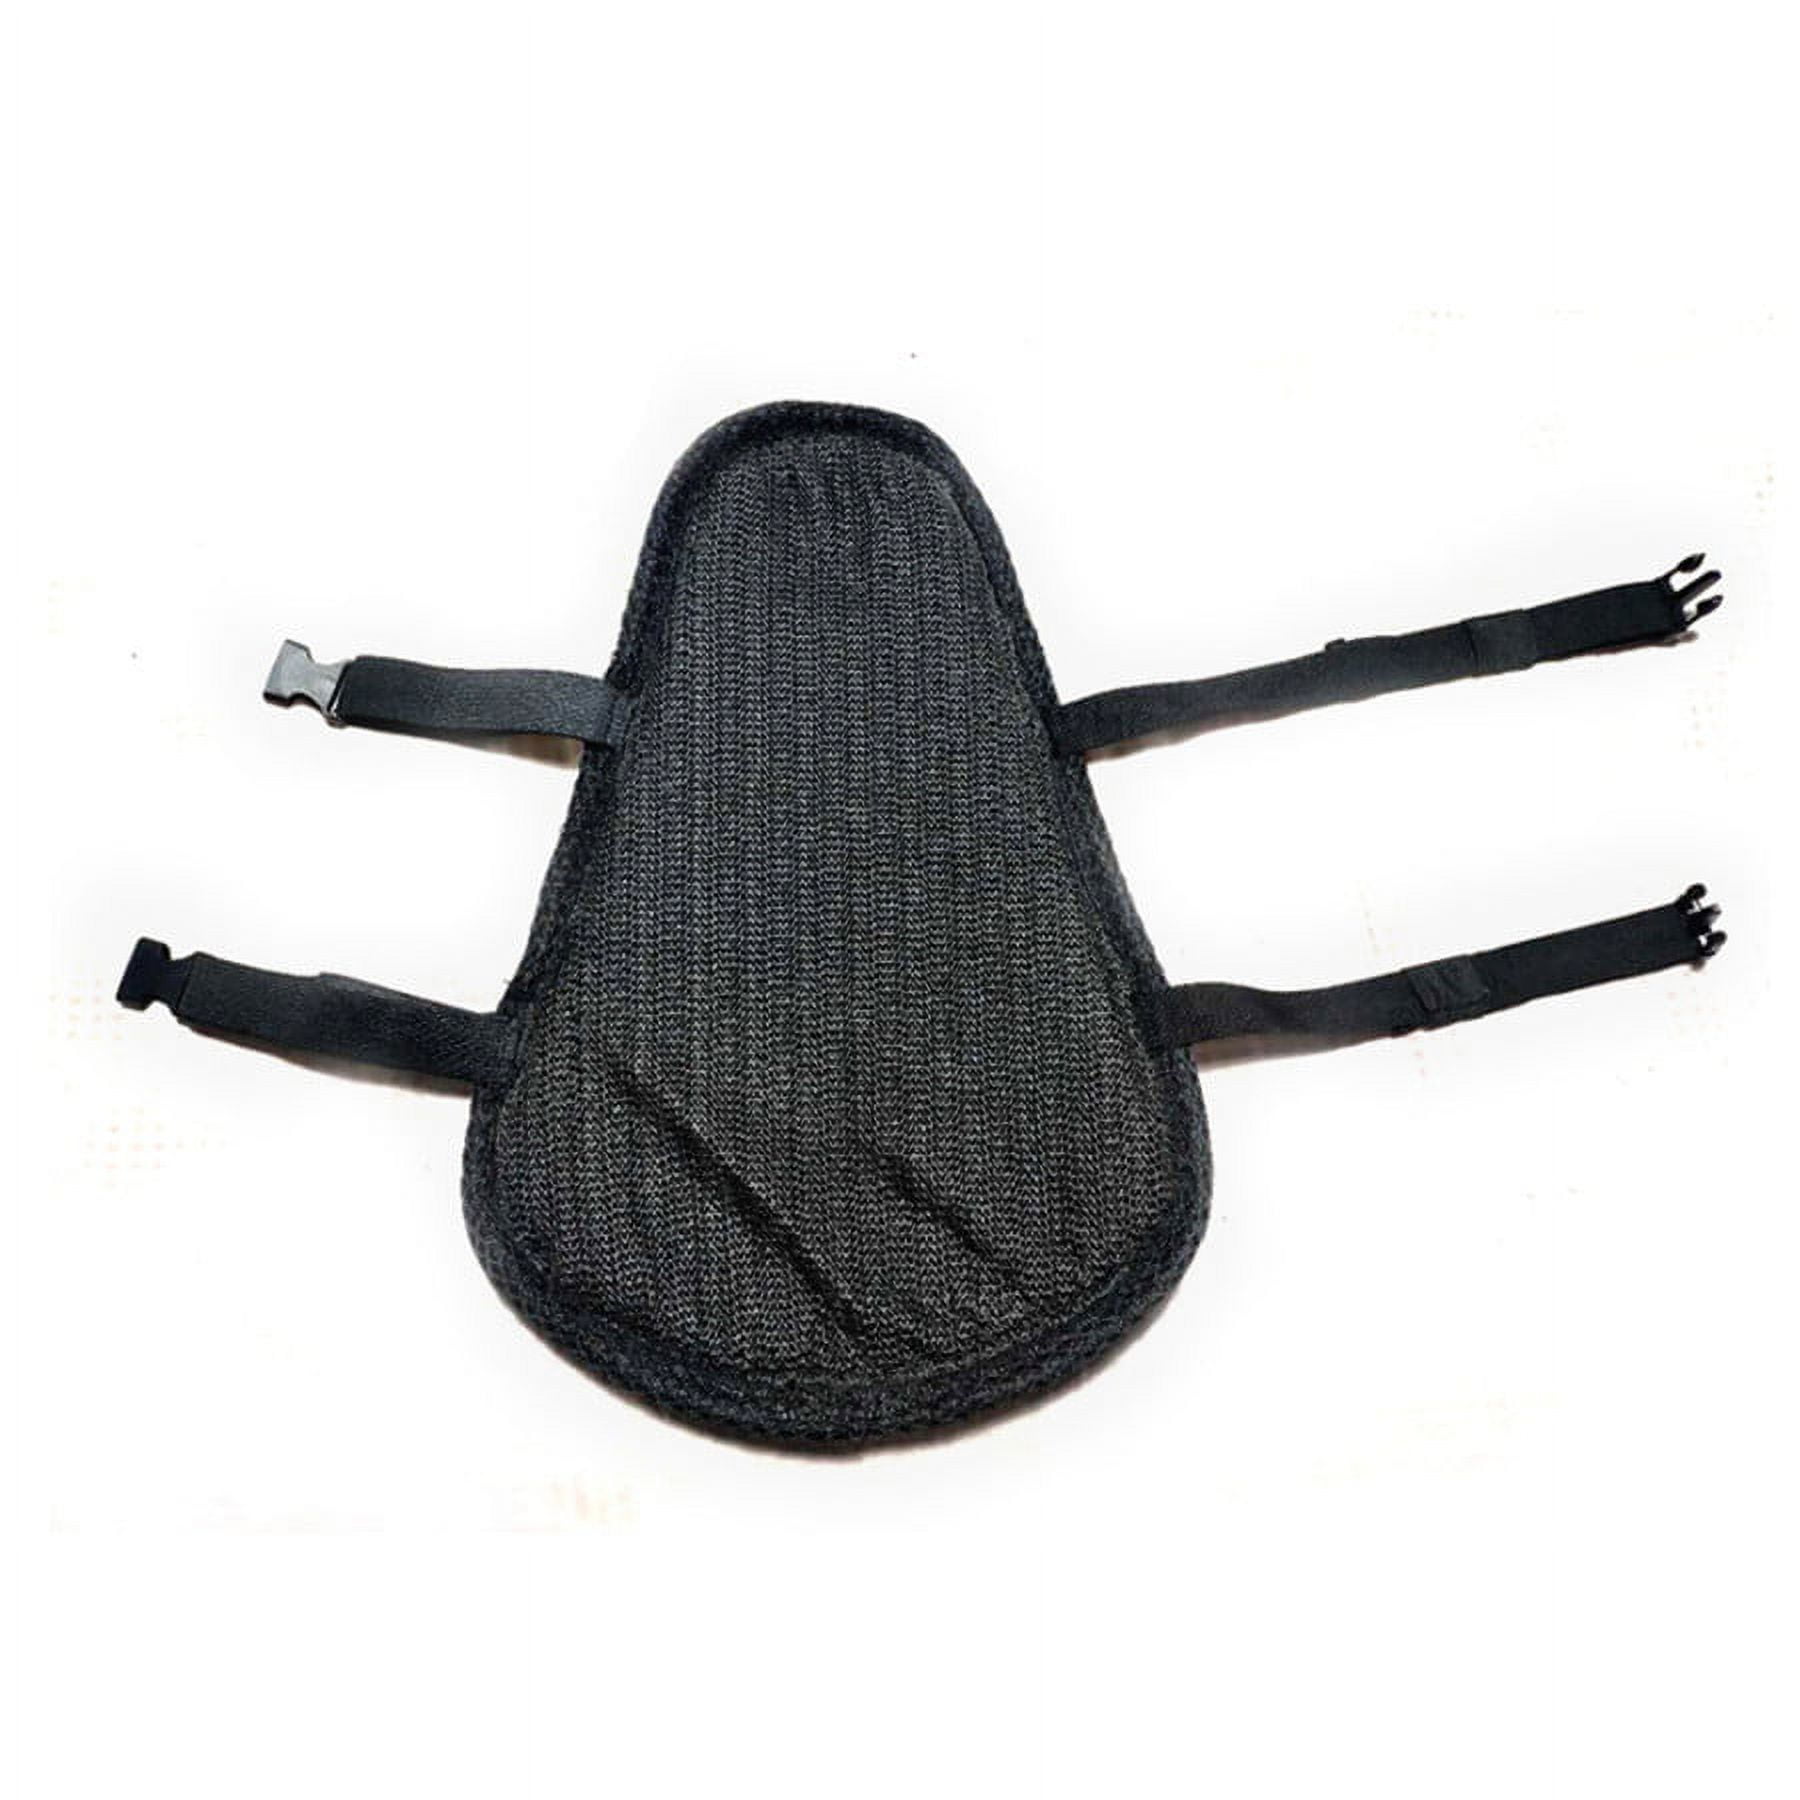 Motorcycle Seat Cushion Comfort Gel Bullet Pad Cover Breathable Pressure  Relief